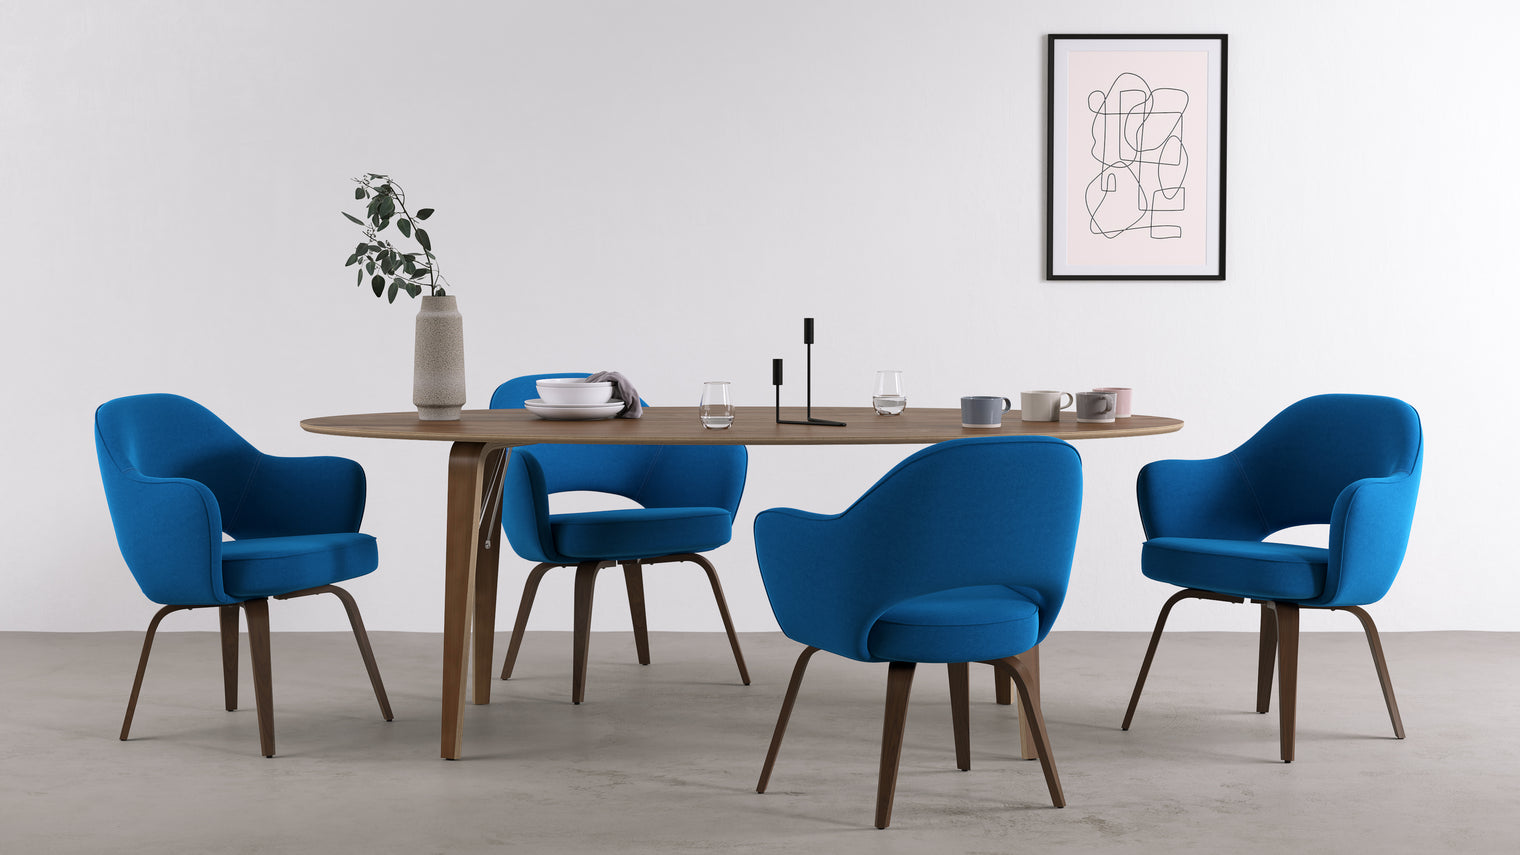 A true people-pleaser|Unquestionably worthy of the highest praise, this revolutionary seating solution offers endless hours of comfort, making it ideal for hard-working executives and creative minds.
